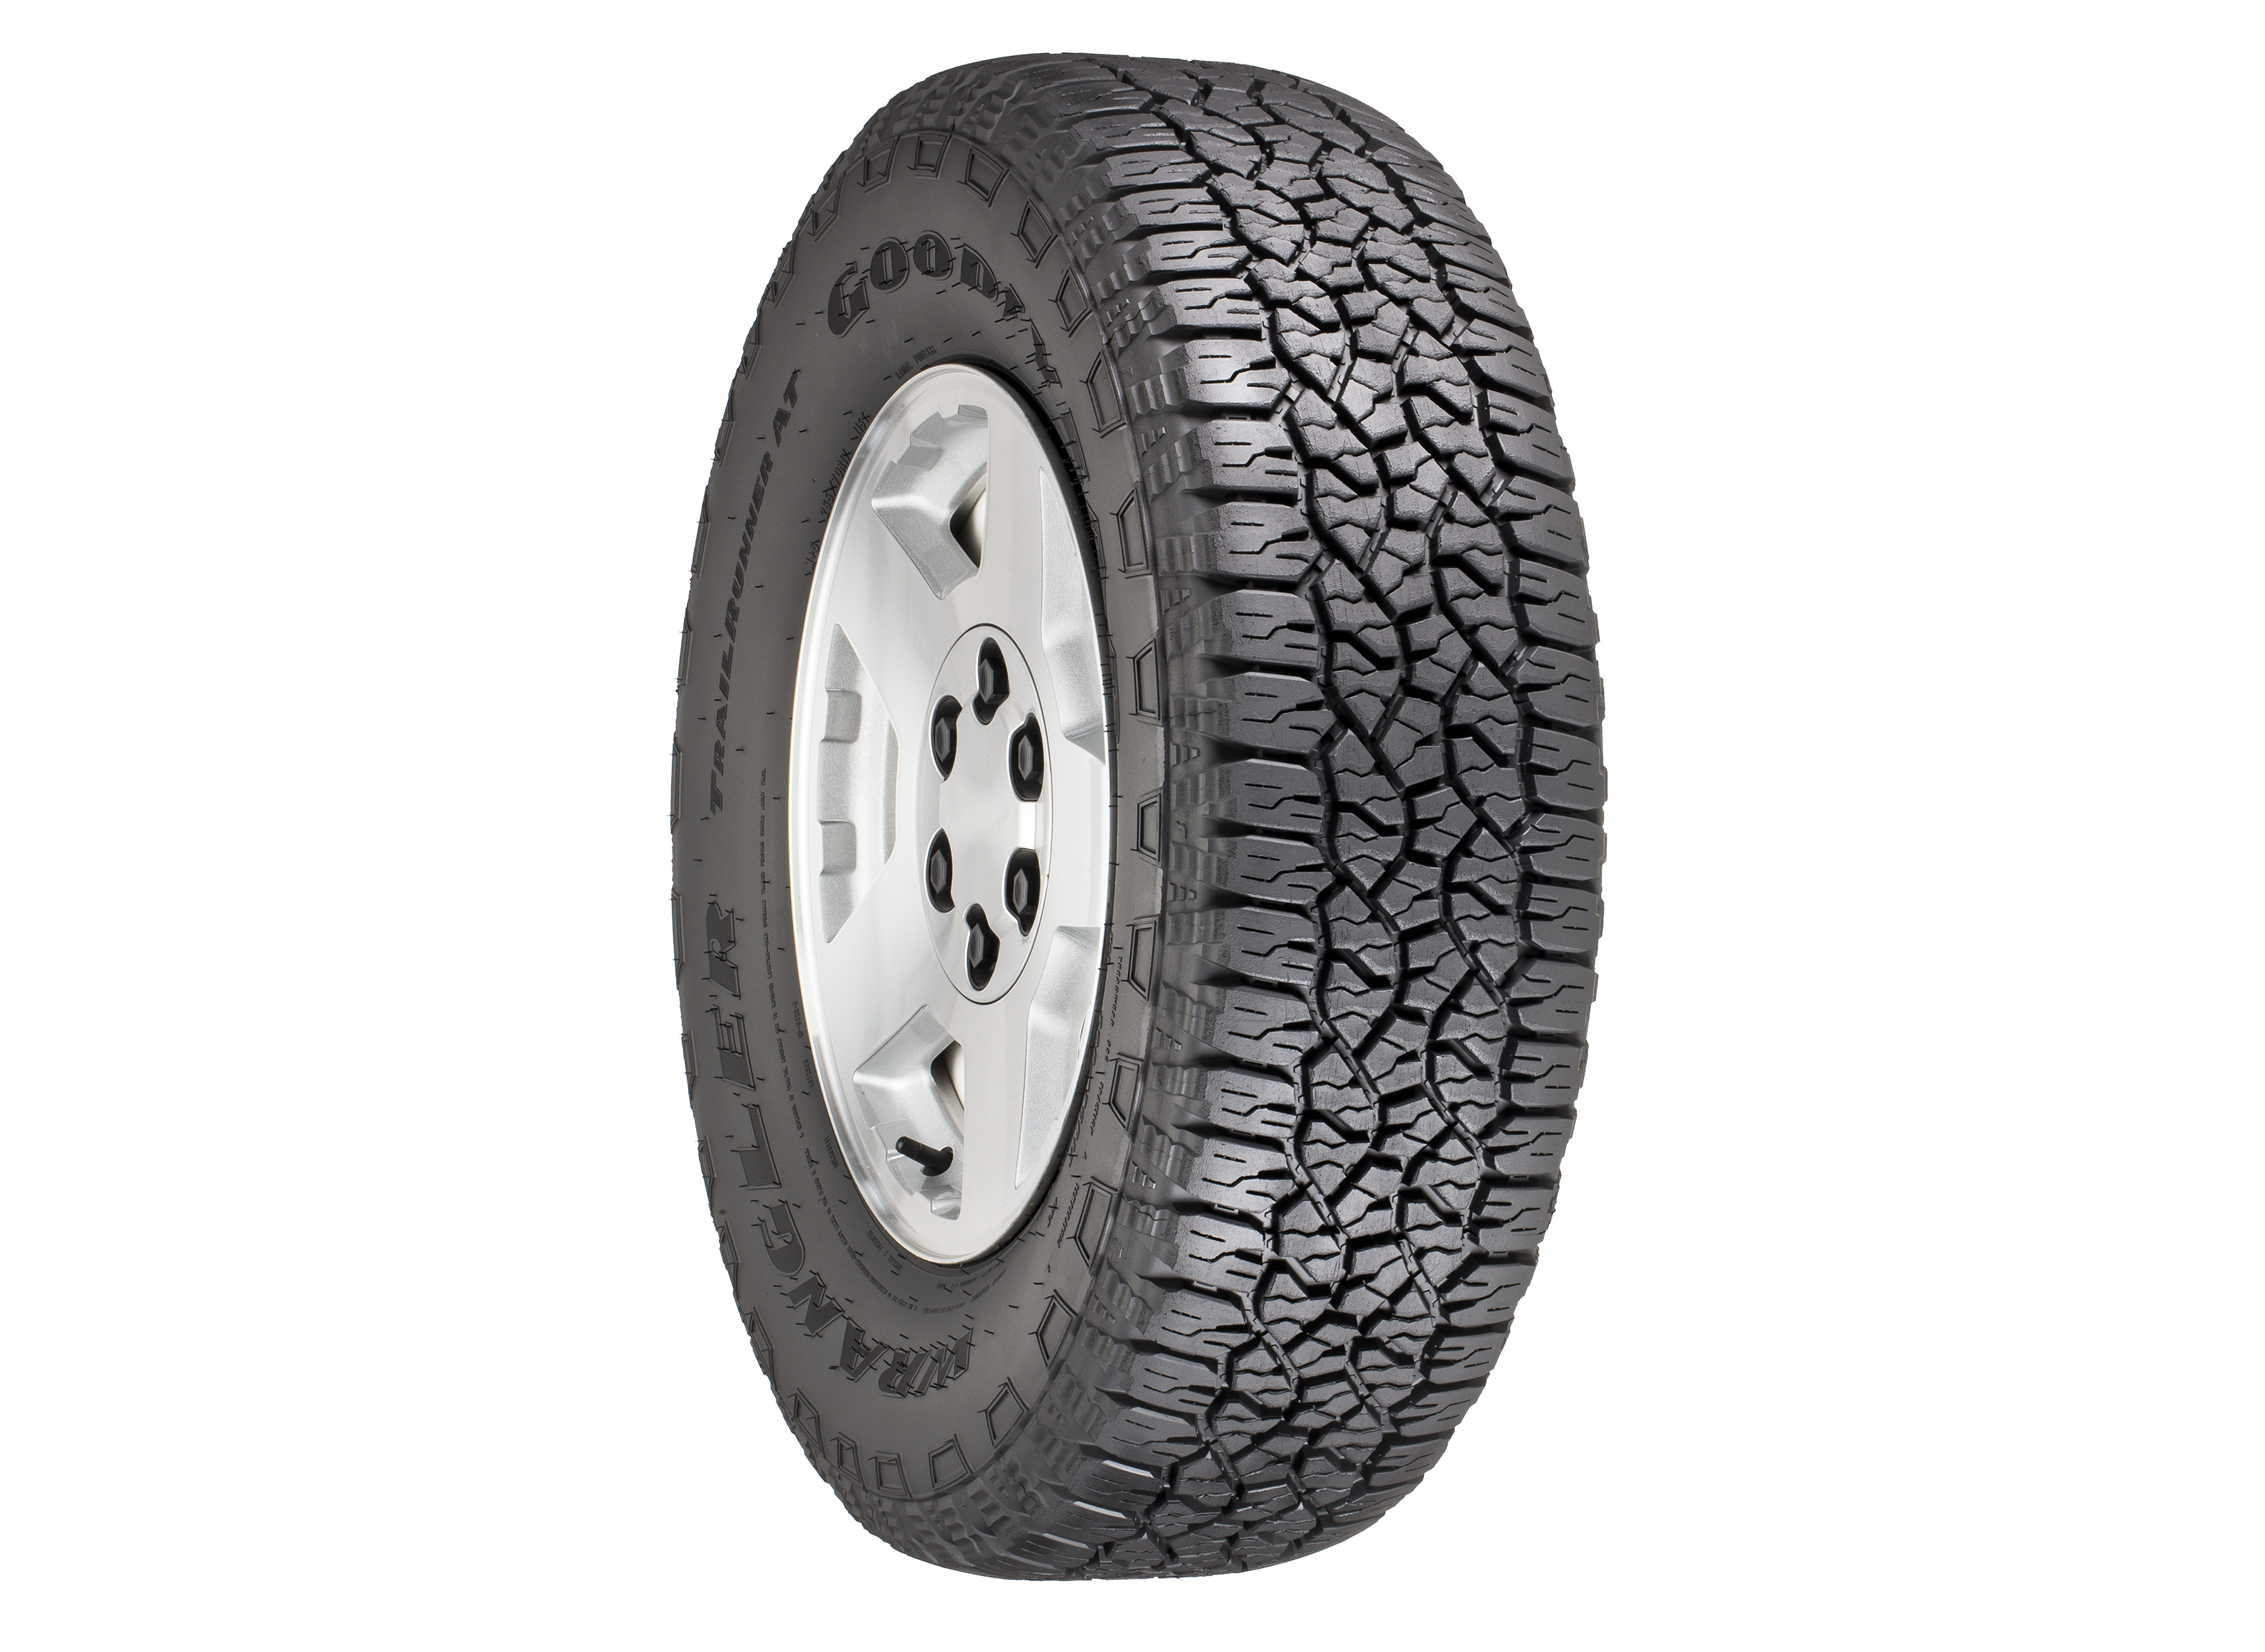 Goodyear Wrangler TrailRunner AT Tire Review - Consumer Reports